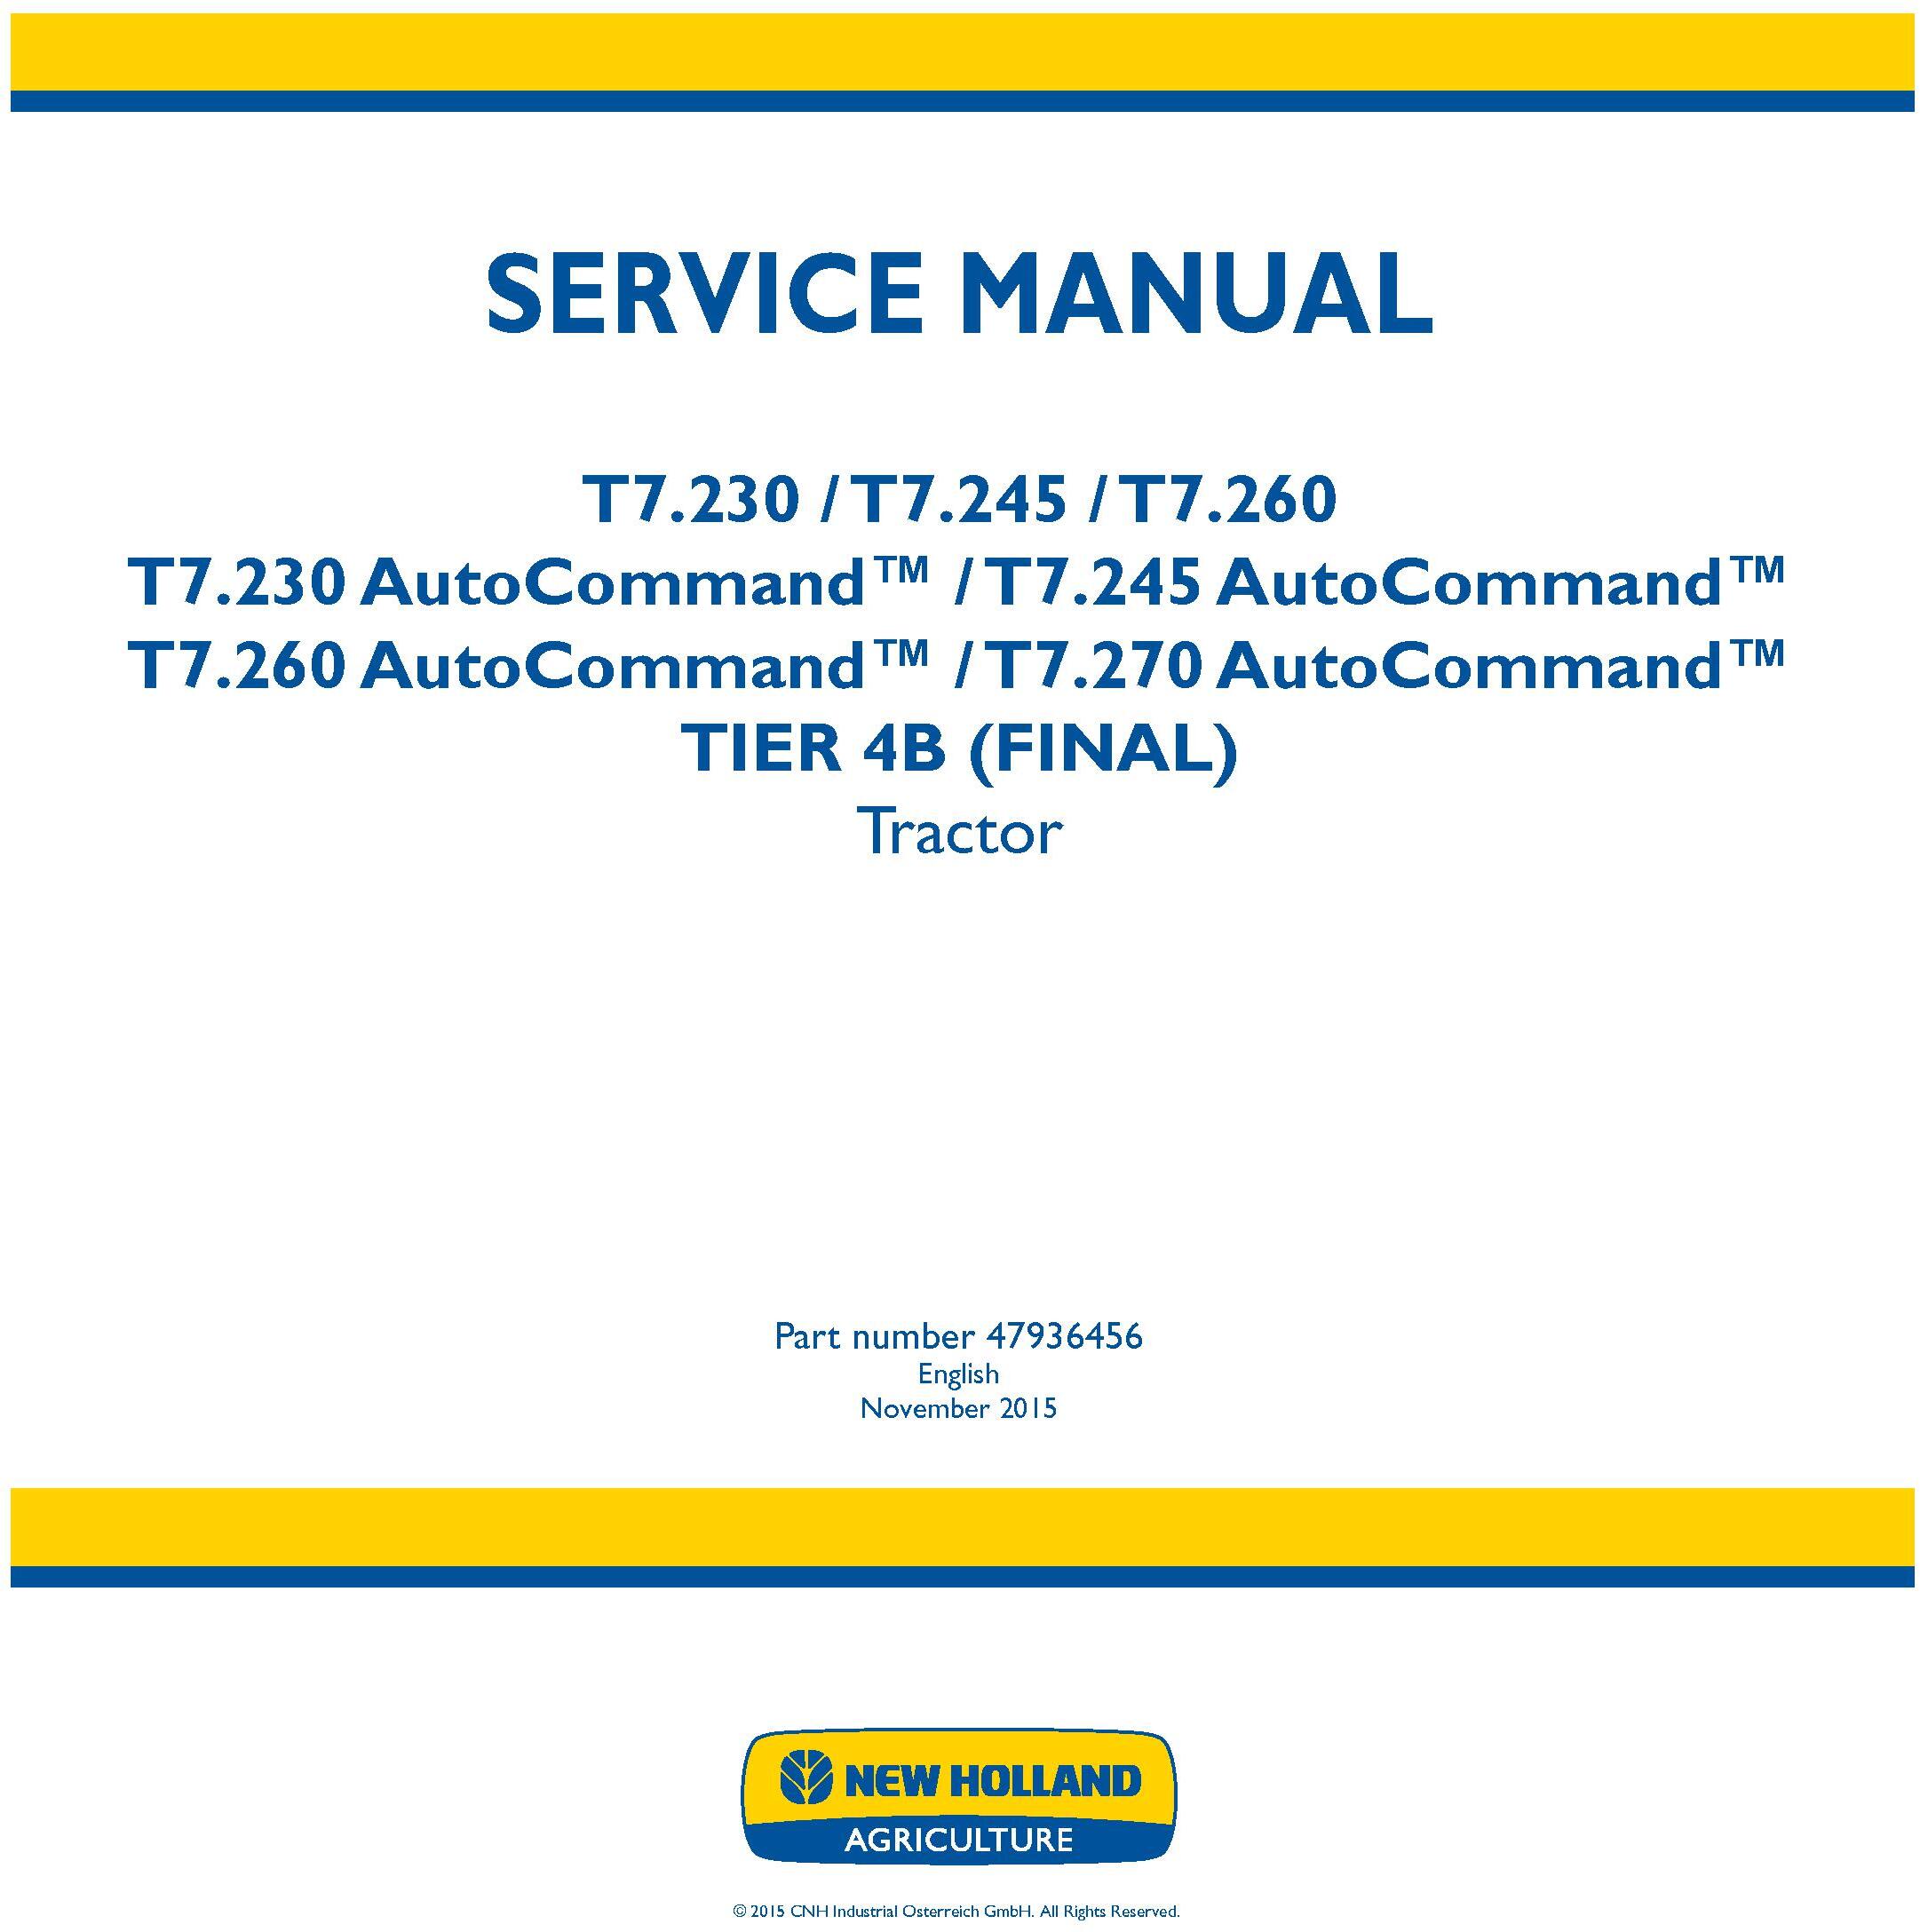 New Holland T7.230, T7.245, T7.260, T7.270 and AutoCommand Tier 4B final Tractor Service Manual - 19465